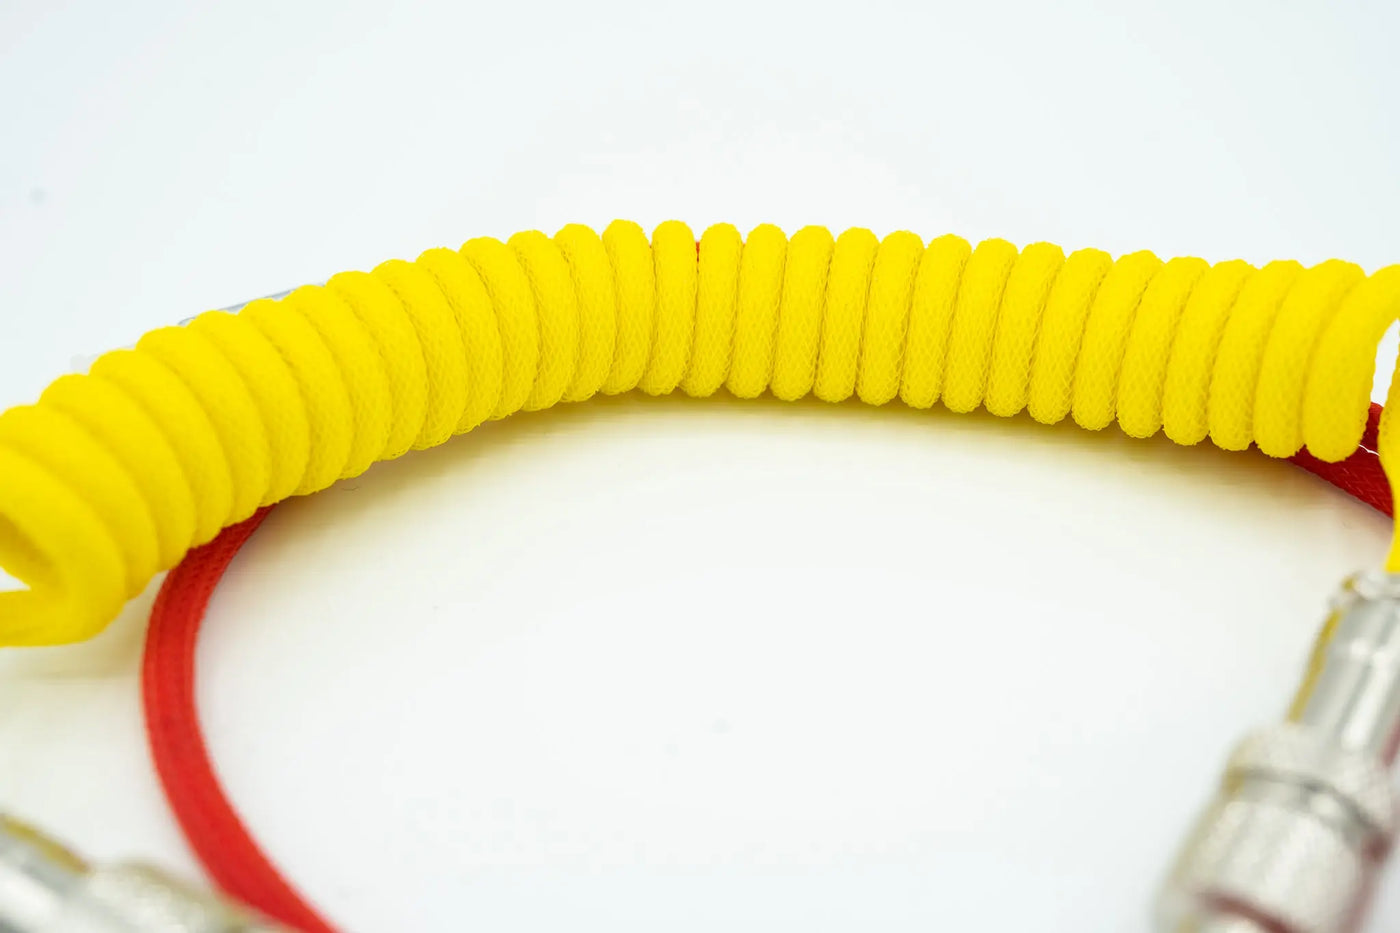 Red and Yellow Light up Custom Coiled Type C USB Cable for Keyboard Vyral